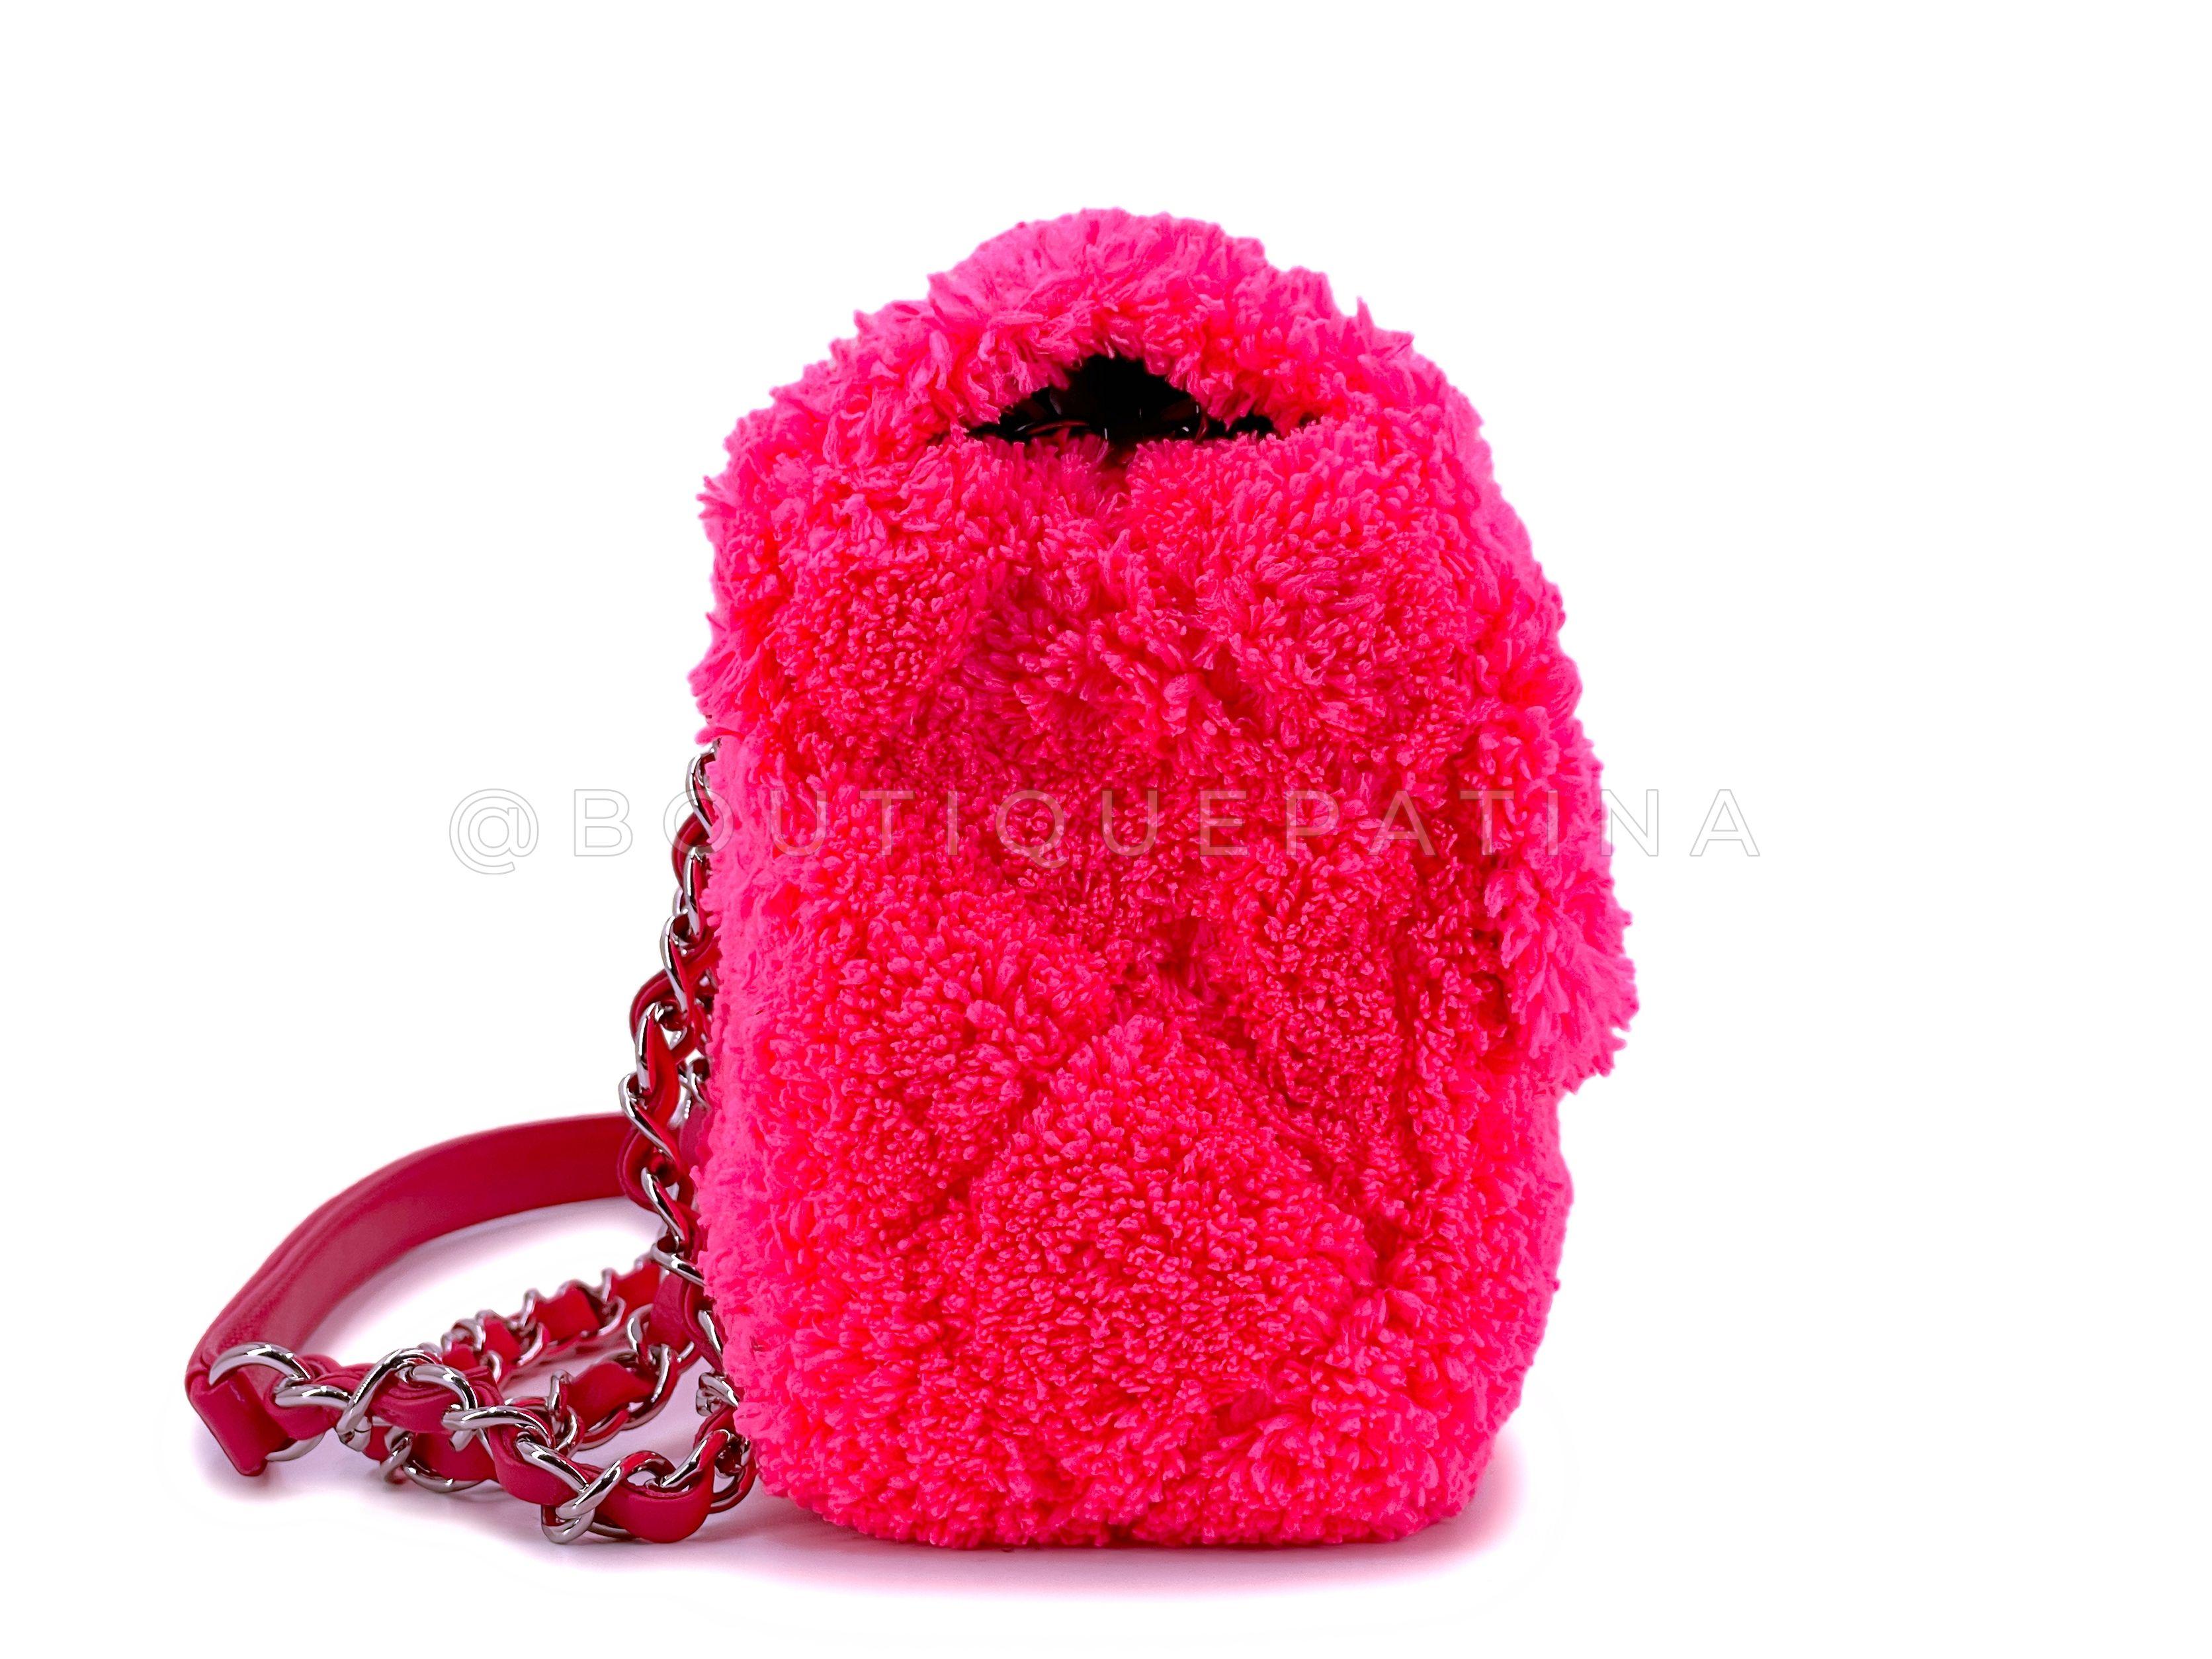 Women's Chanel Neon Pink Terry Fur Flap Bag 67683 For Sale